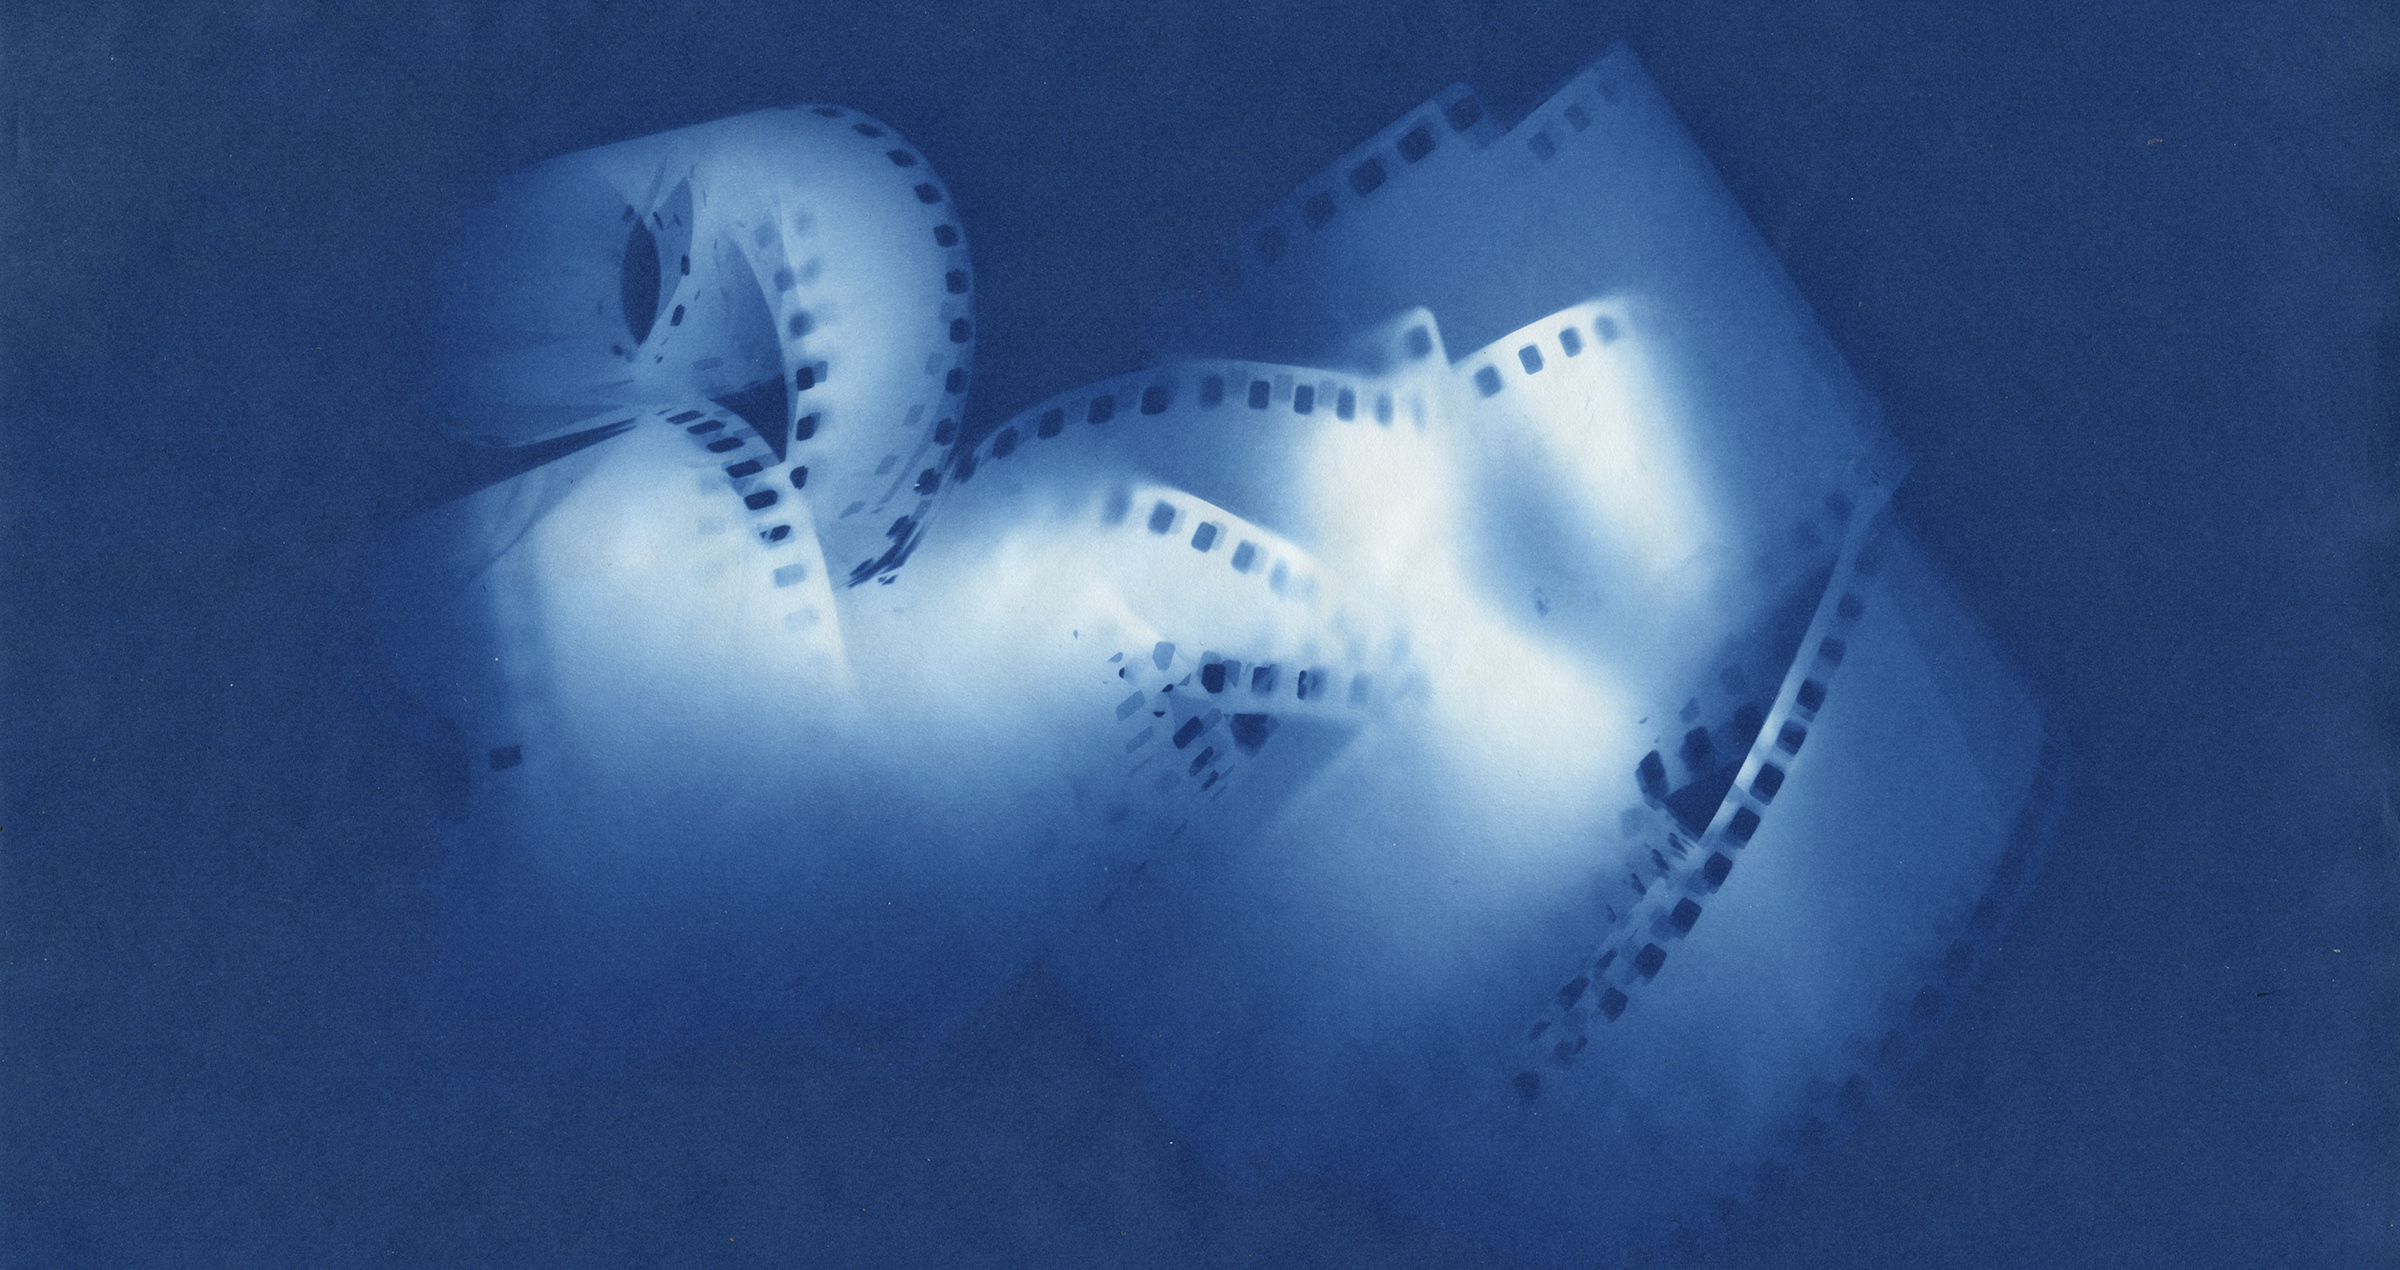 Parallax Cyanotype Paper Review